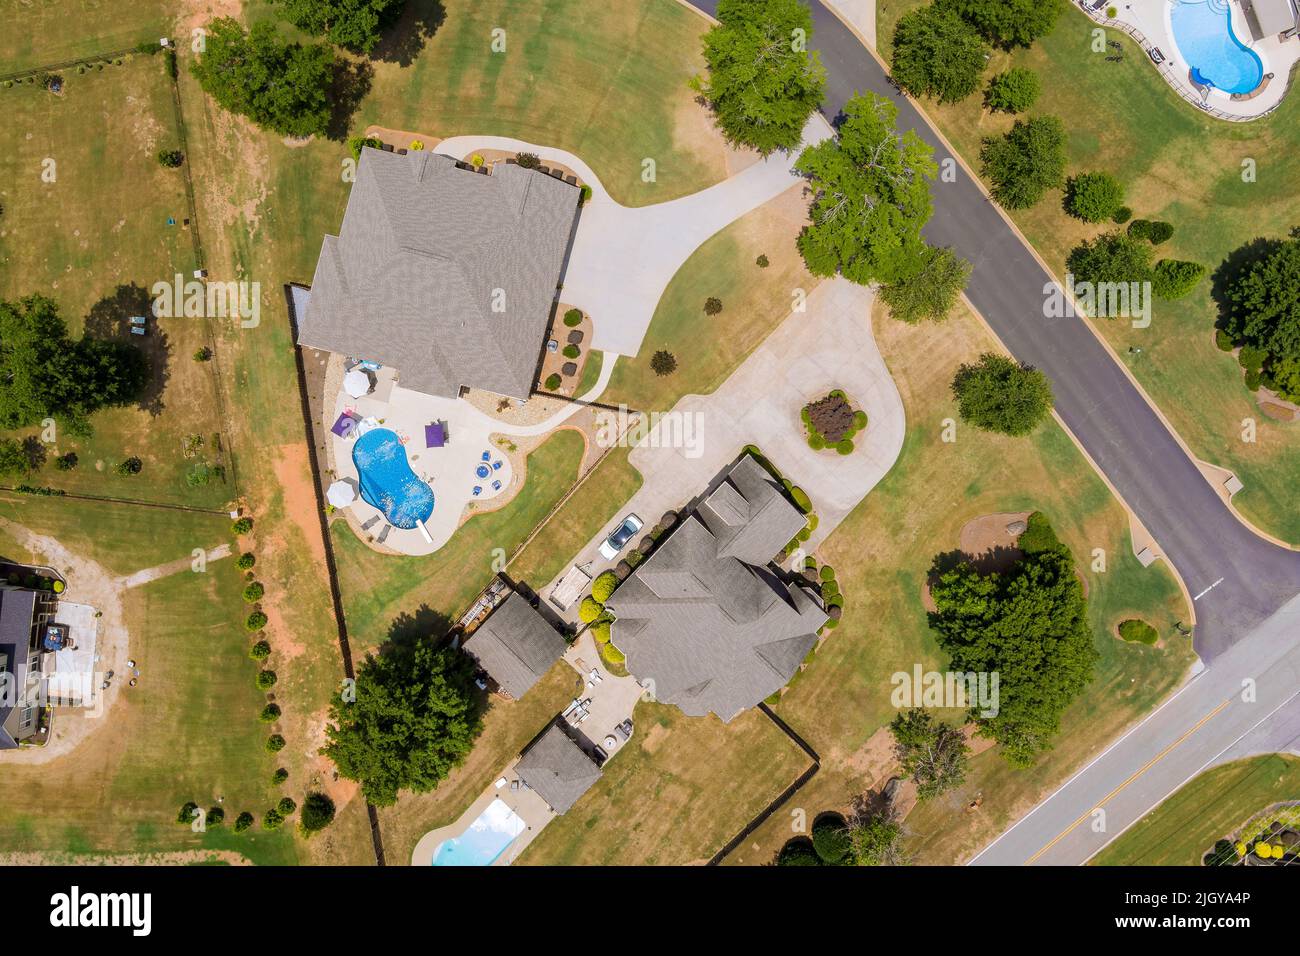 Residential sleeping area street the a small town with above aerial view in Boiling Springs South Carolina Stock Photo